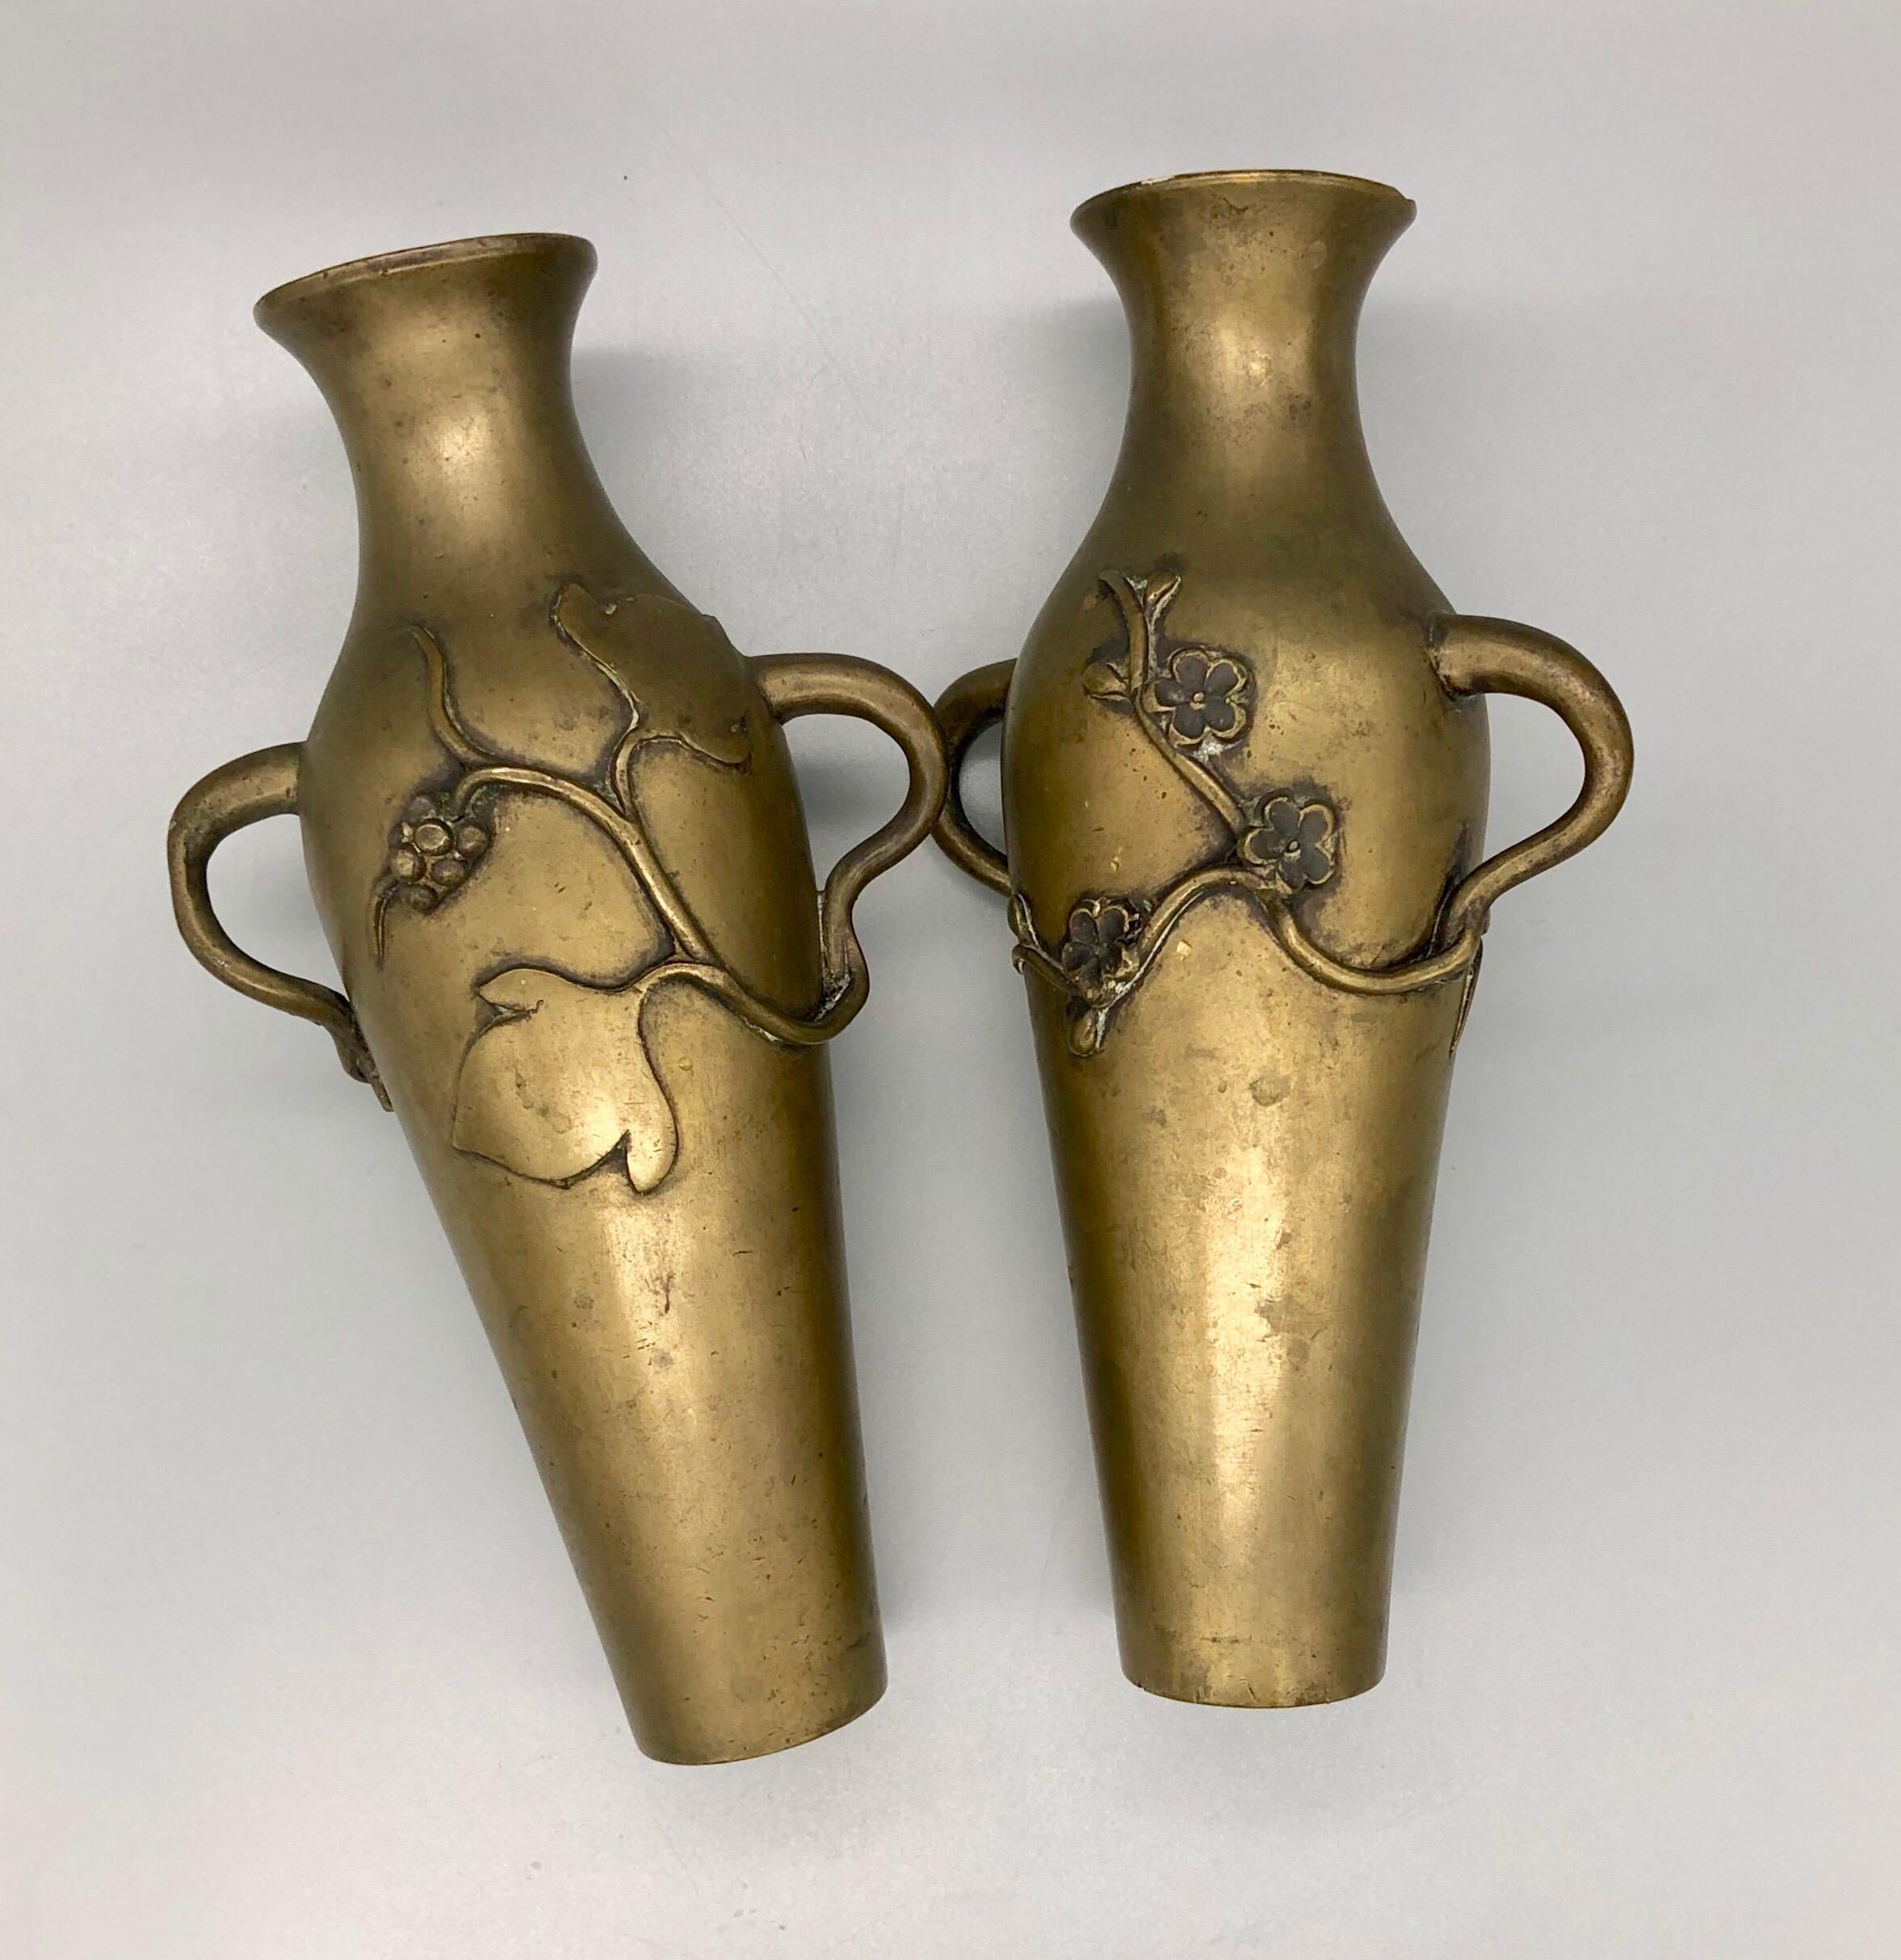 Forged Pair of Handmade Meiji Era Bronze Art Nouveau Vases, Flowers and Grapevine For Sale